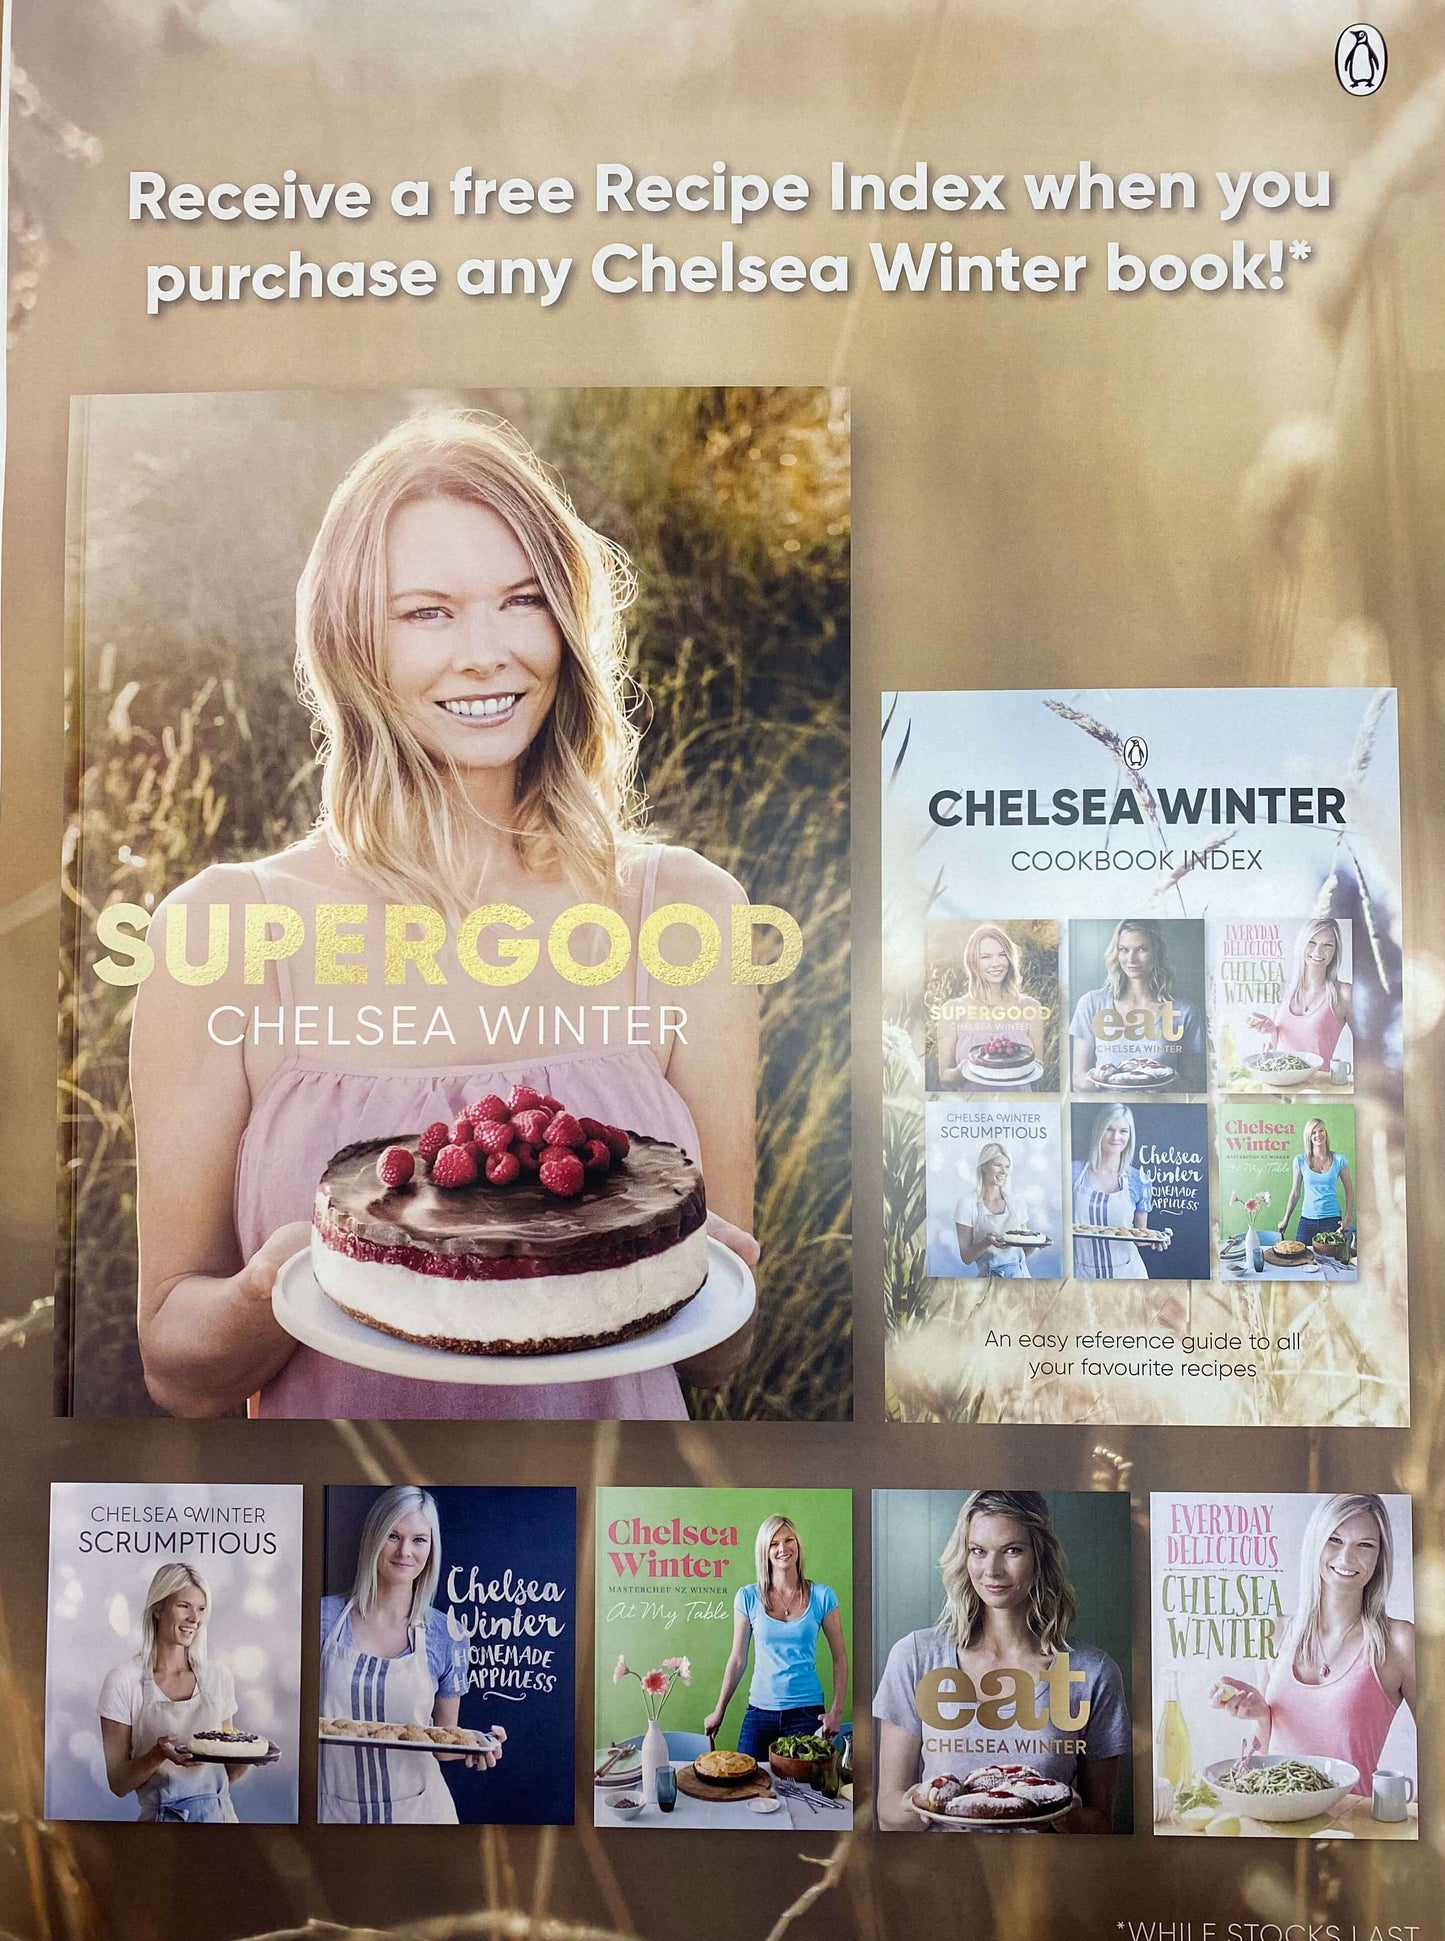 Supergood by Chelsea Winter